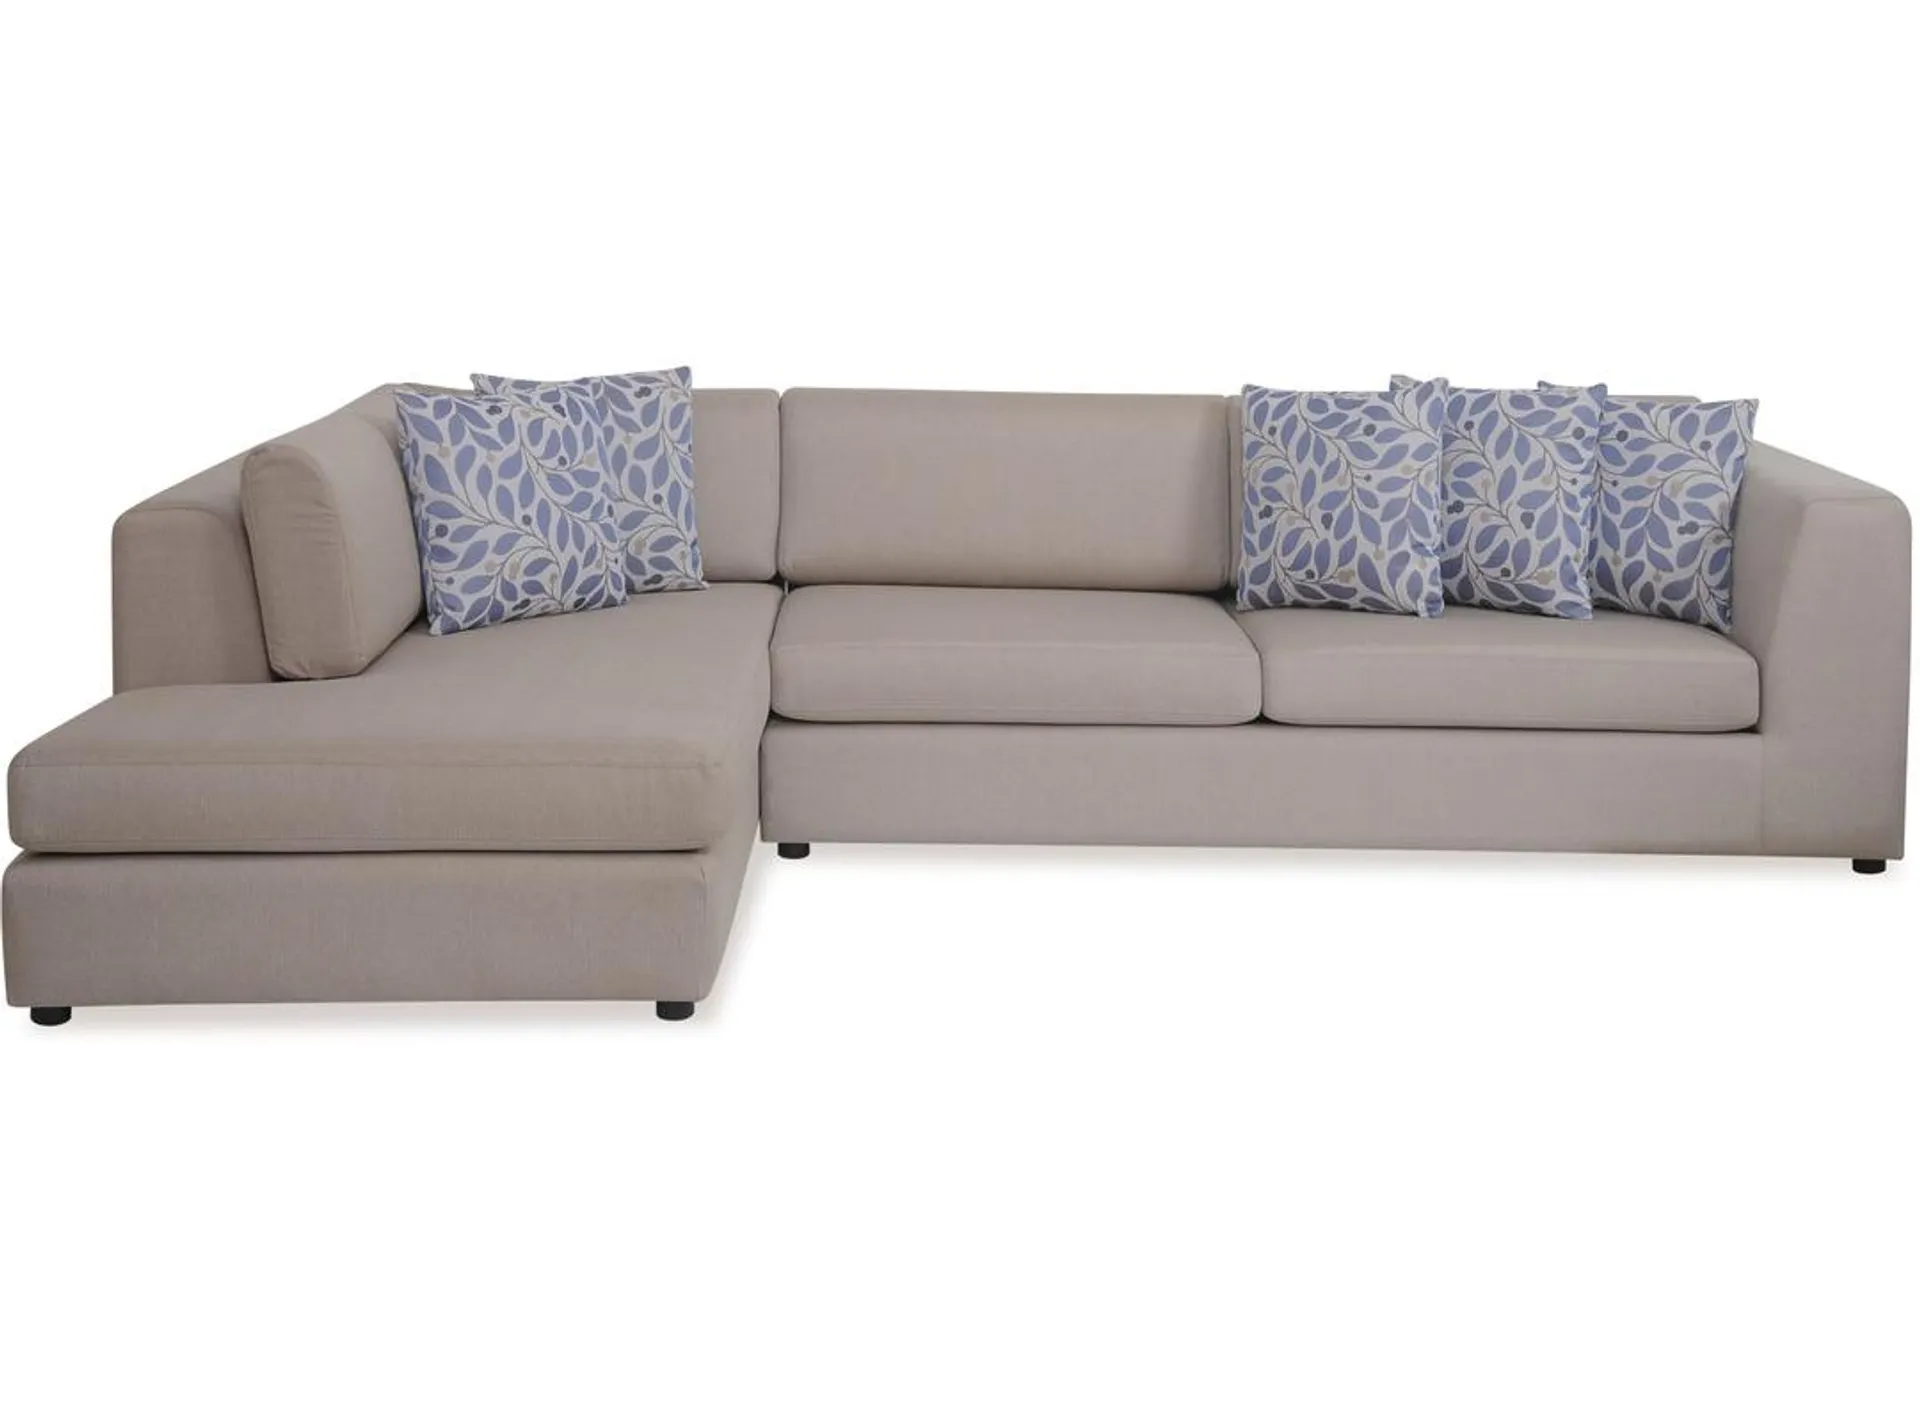 Ollie Modular Chaise 2000 Lounge Suite LHF